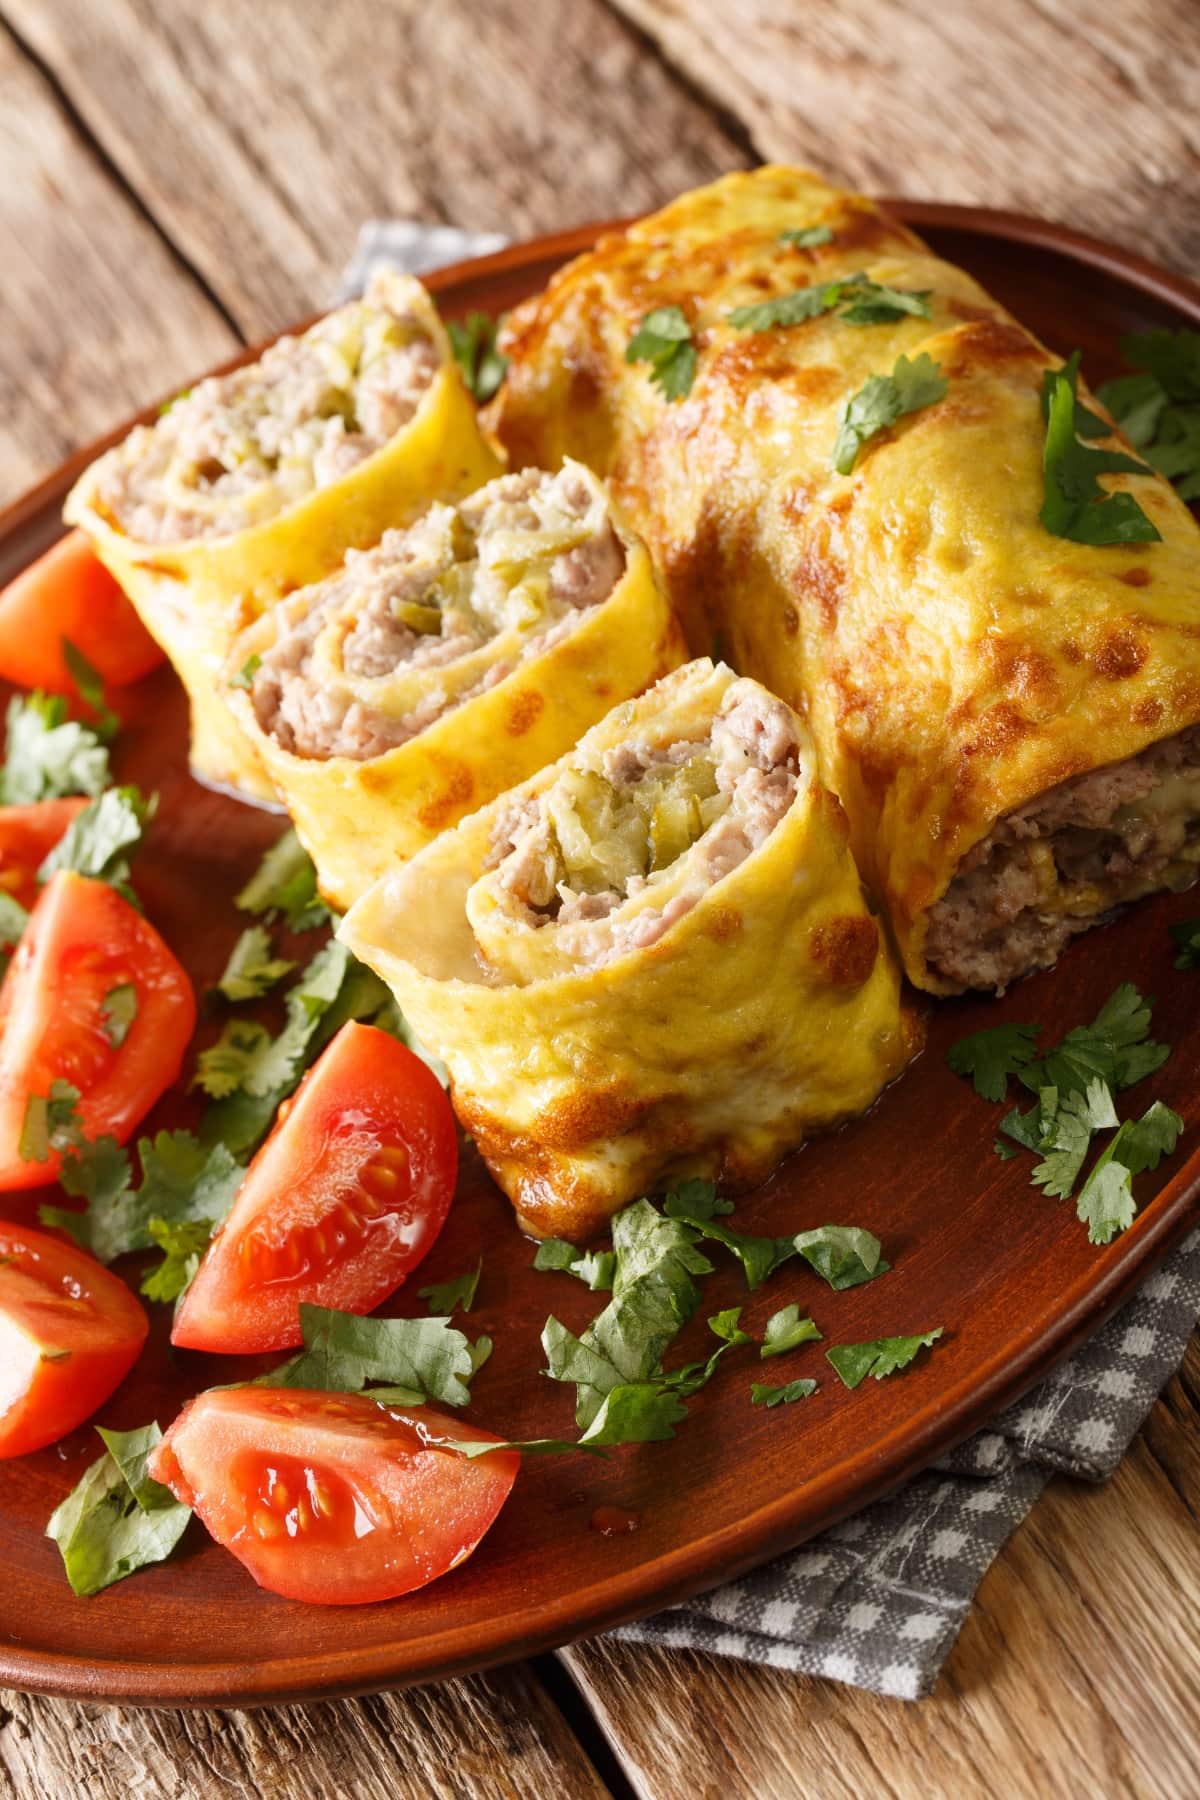 Egg rolls filled with ground meat served with tomatoes and cilantro on a wooden table